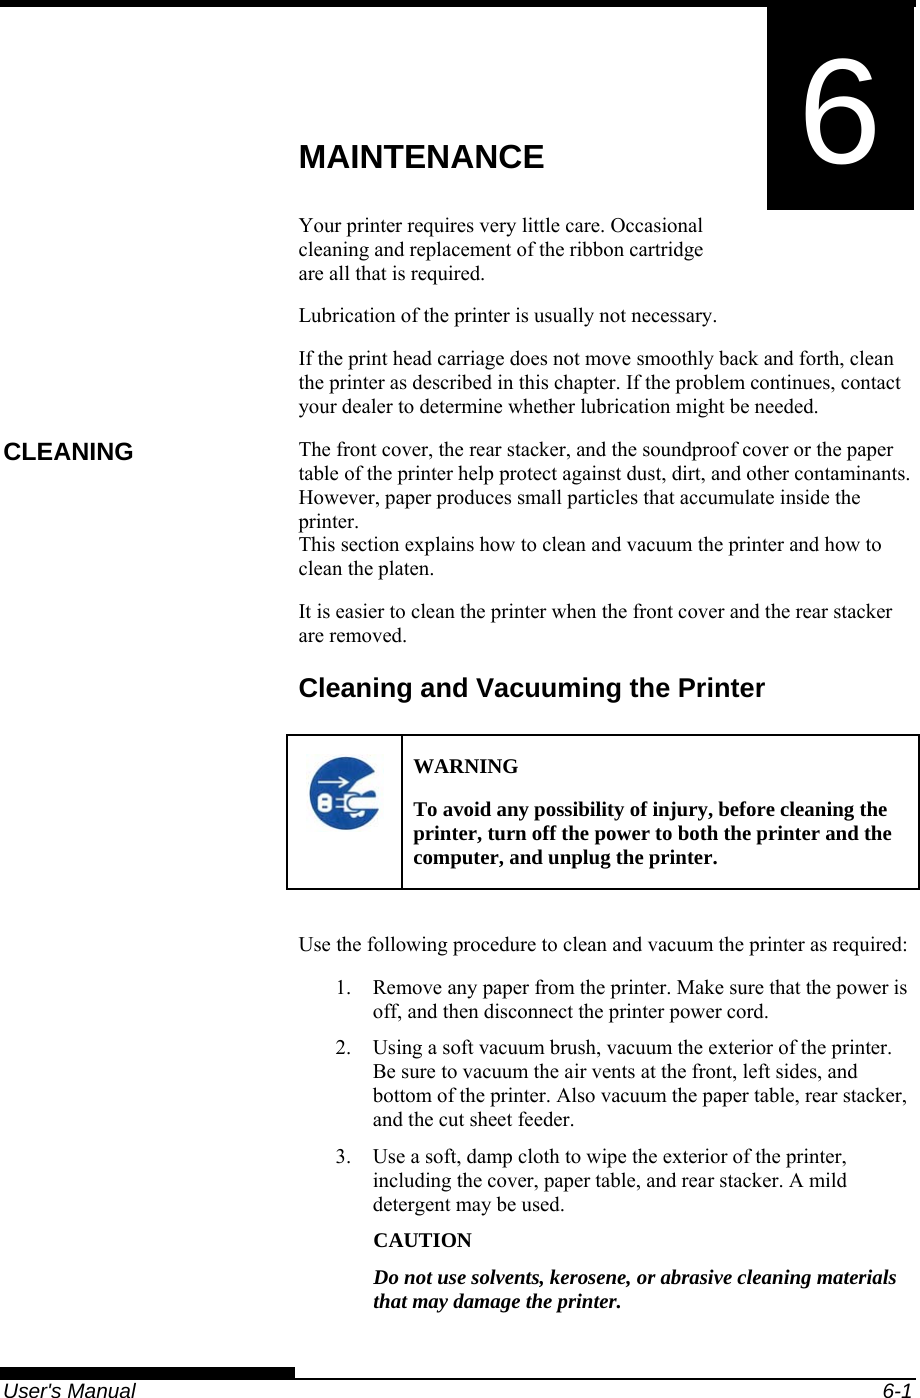   User&apos;s Manual  6-1 6  CHAPTER 6  MAINTENANCE MAINTENANCE Your printer requires very little care. Occasional cleaning and replacement of the ribbon cartridge are all that is required. Lubrication of the printer is usually not necessary. If the print head carriage does not move smoothly back and forth, clean the printer as described in this chapter. If the problem continues, contact your dealer to determine whether lubrication might be needed. The front cover, the rear stacker, and the soundproof cover or the paper table of the printer help protect against dust, dirt, and other contaminants. However, paper produces small particles that accumulate inside the printer. This section explains how to clean and vacuum the printer and how to clean the platen. It is easier to clean the printer when the front cover and the rear stacker are removed. Cleaning and Vacuuming the Printer  WARNING To avoid any possibility of injury, before cleaning the printer, turn off the power to both the printer and the computer, and unplug the printer.  Use the following procedure to clean and vacuum the printer as required: 1.  Remove any paper from the printer. Make sure that the power is off, and then disconnect the printer power cord. 2.  Using a soft vacuum brush, vacuum the exterior of the printer. Be sure to vacuum the air vents at the front, left sides, and bottom of the printer. Also vacuum the paper table, rear stacker, and the cut sheet feeder. 3.  Use a soft, damp cloth to wipe the exterior of the printer, including the cover, paper table, and rear stacker. A mild detergent may be used. CAUTION Do not use solvents, kerosene, or abrasive cleaning materials that may damage the printer. CLEANING 